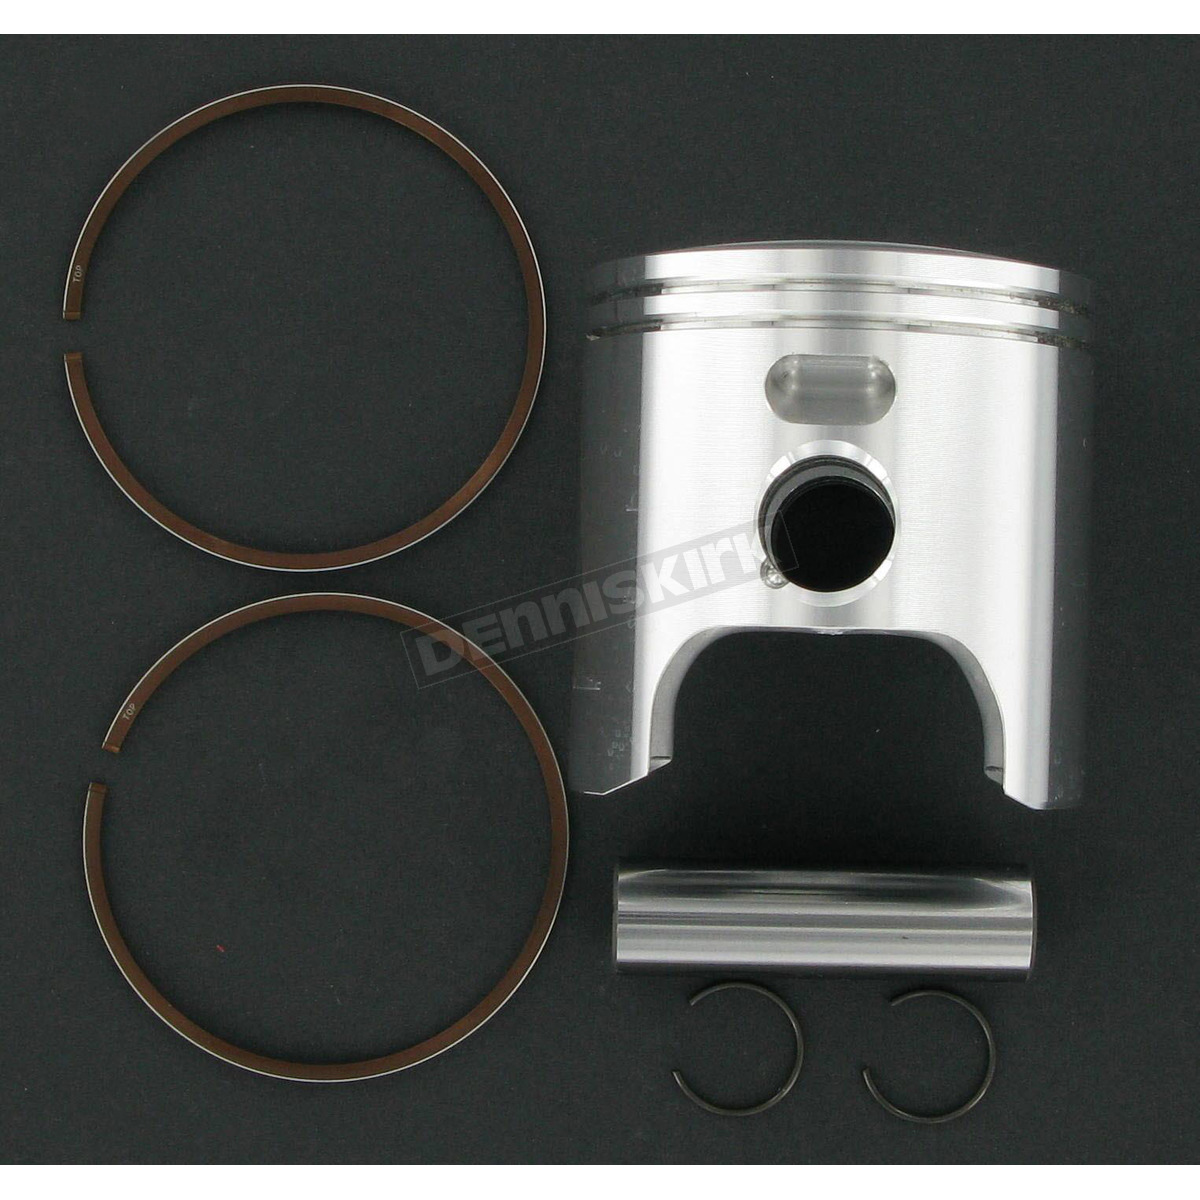 Wiseco Piston Assembly - 74mm Bore - 2417M07400 Snowmobile - Dennis Kirk